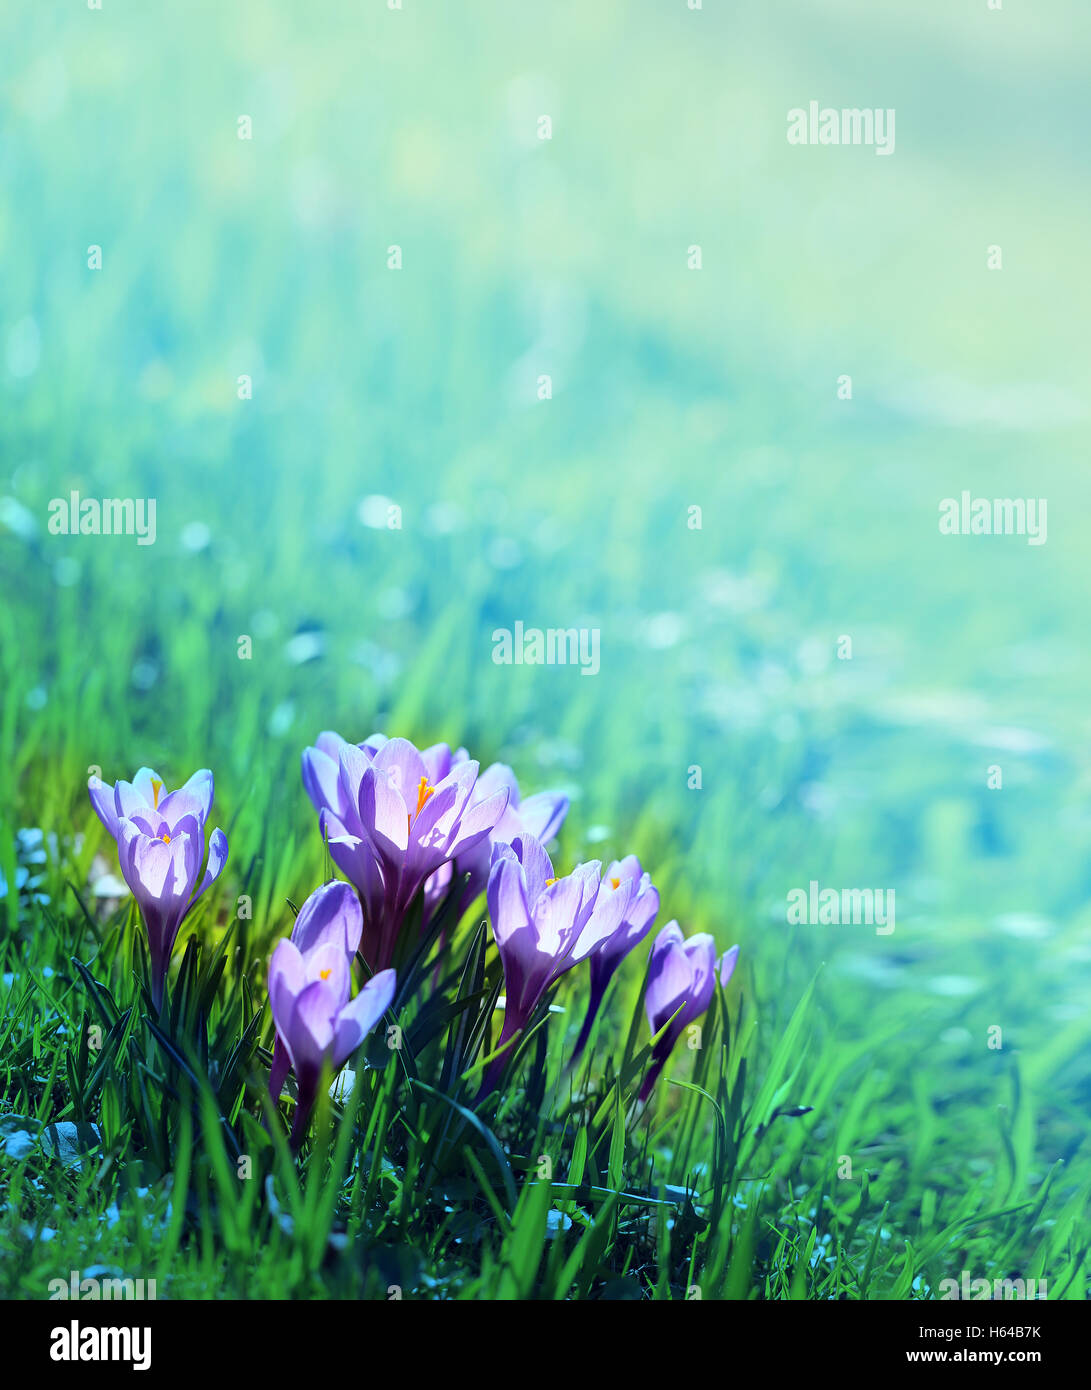 Beautiful flowers crocuses on green grass photographed in close-up Stock Photo